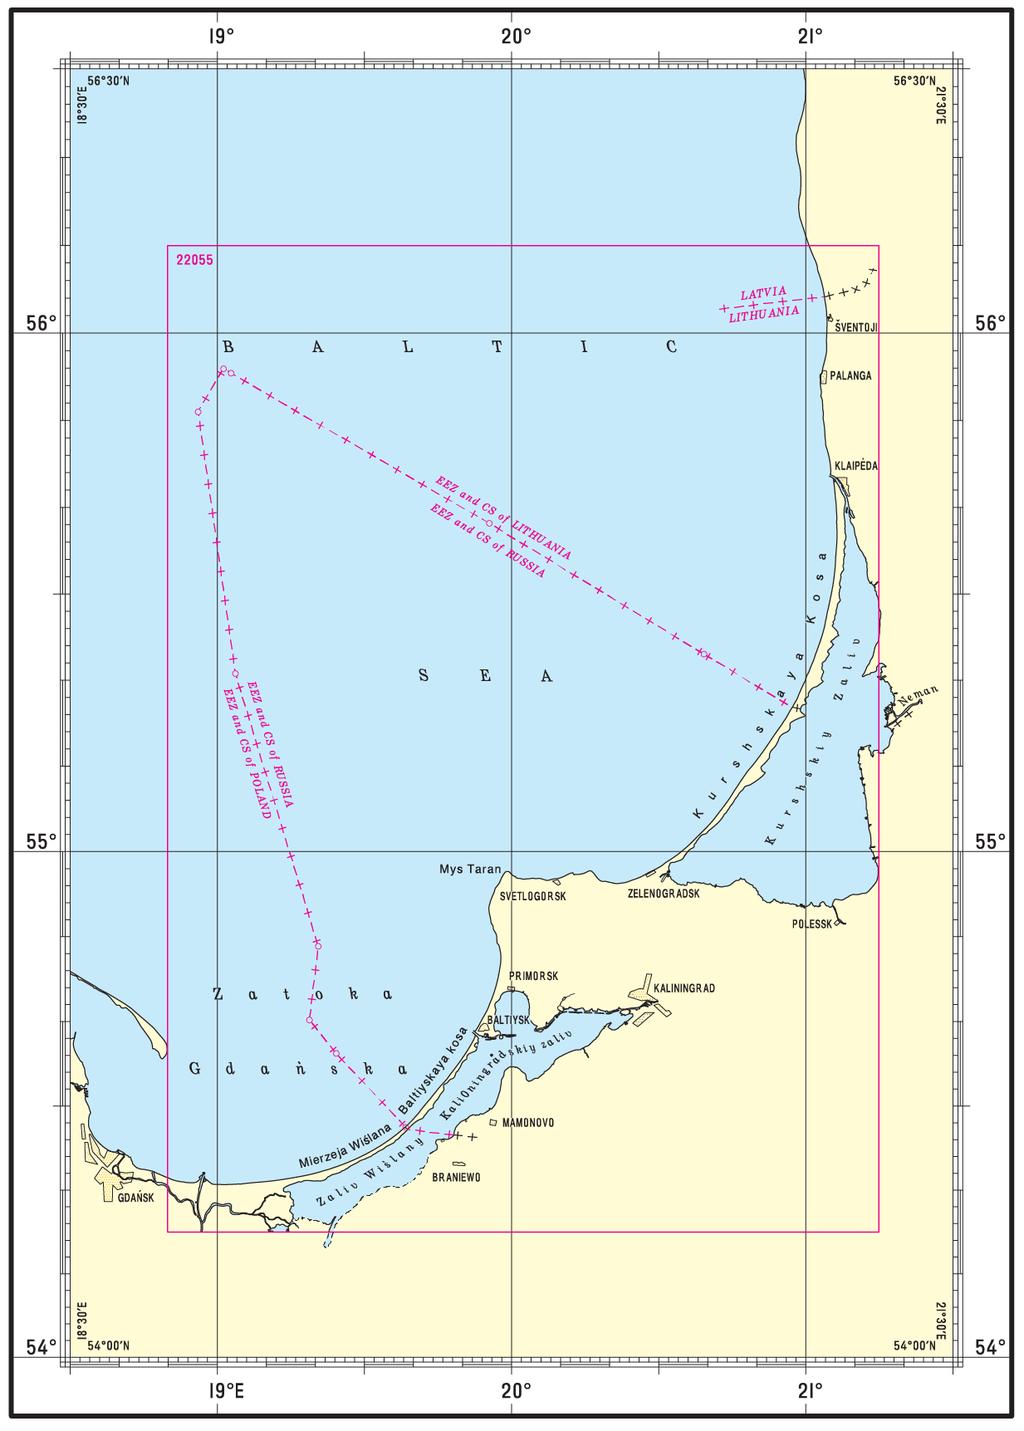 The scheme of the national navigation